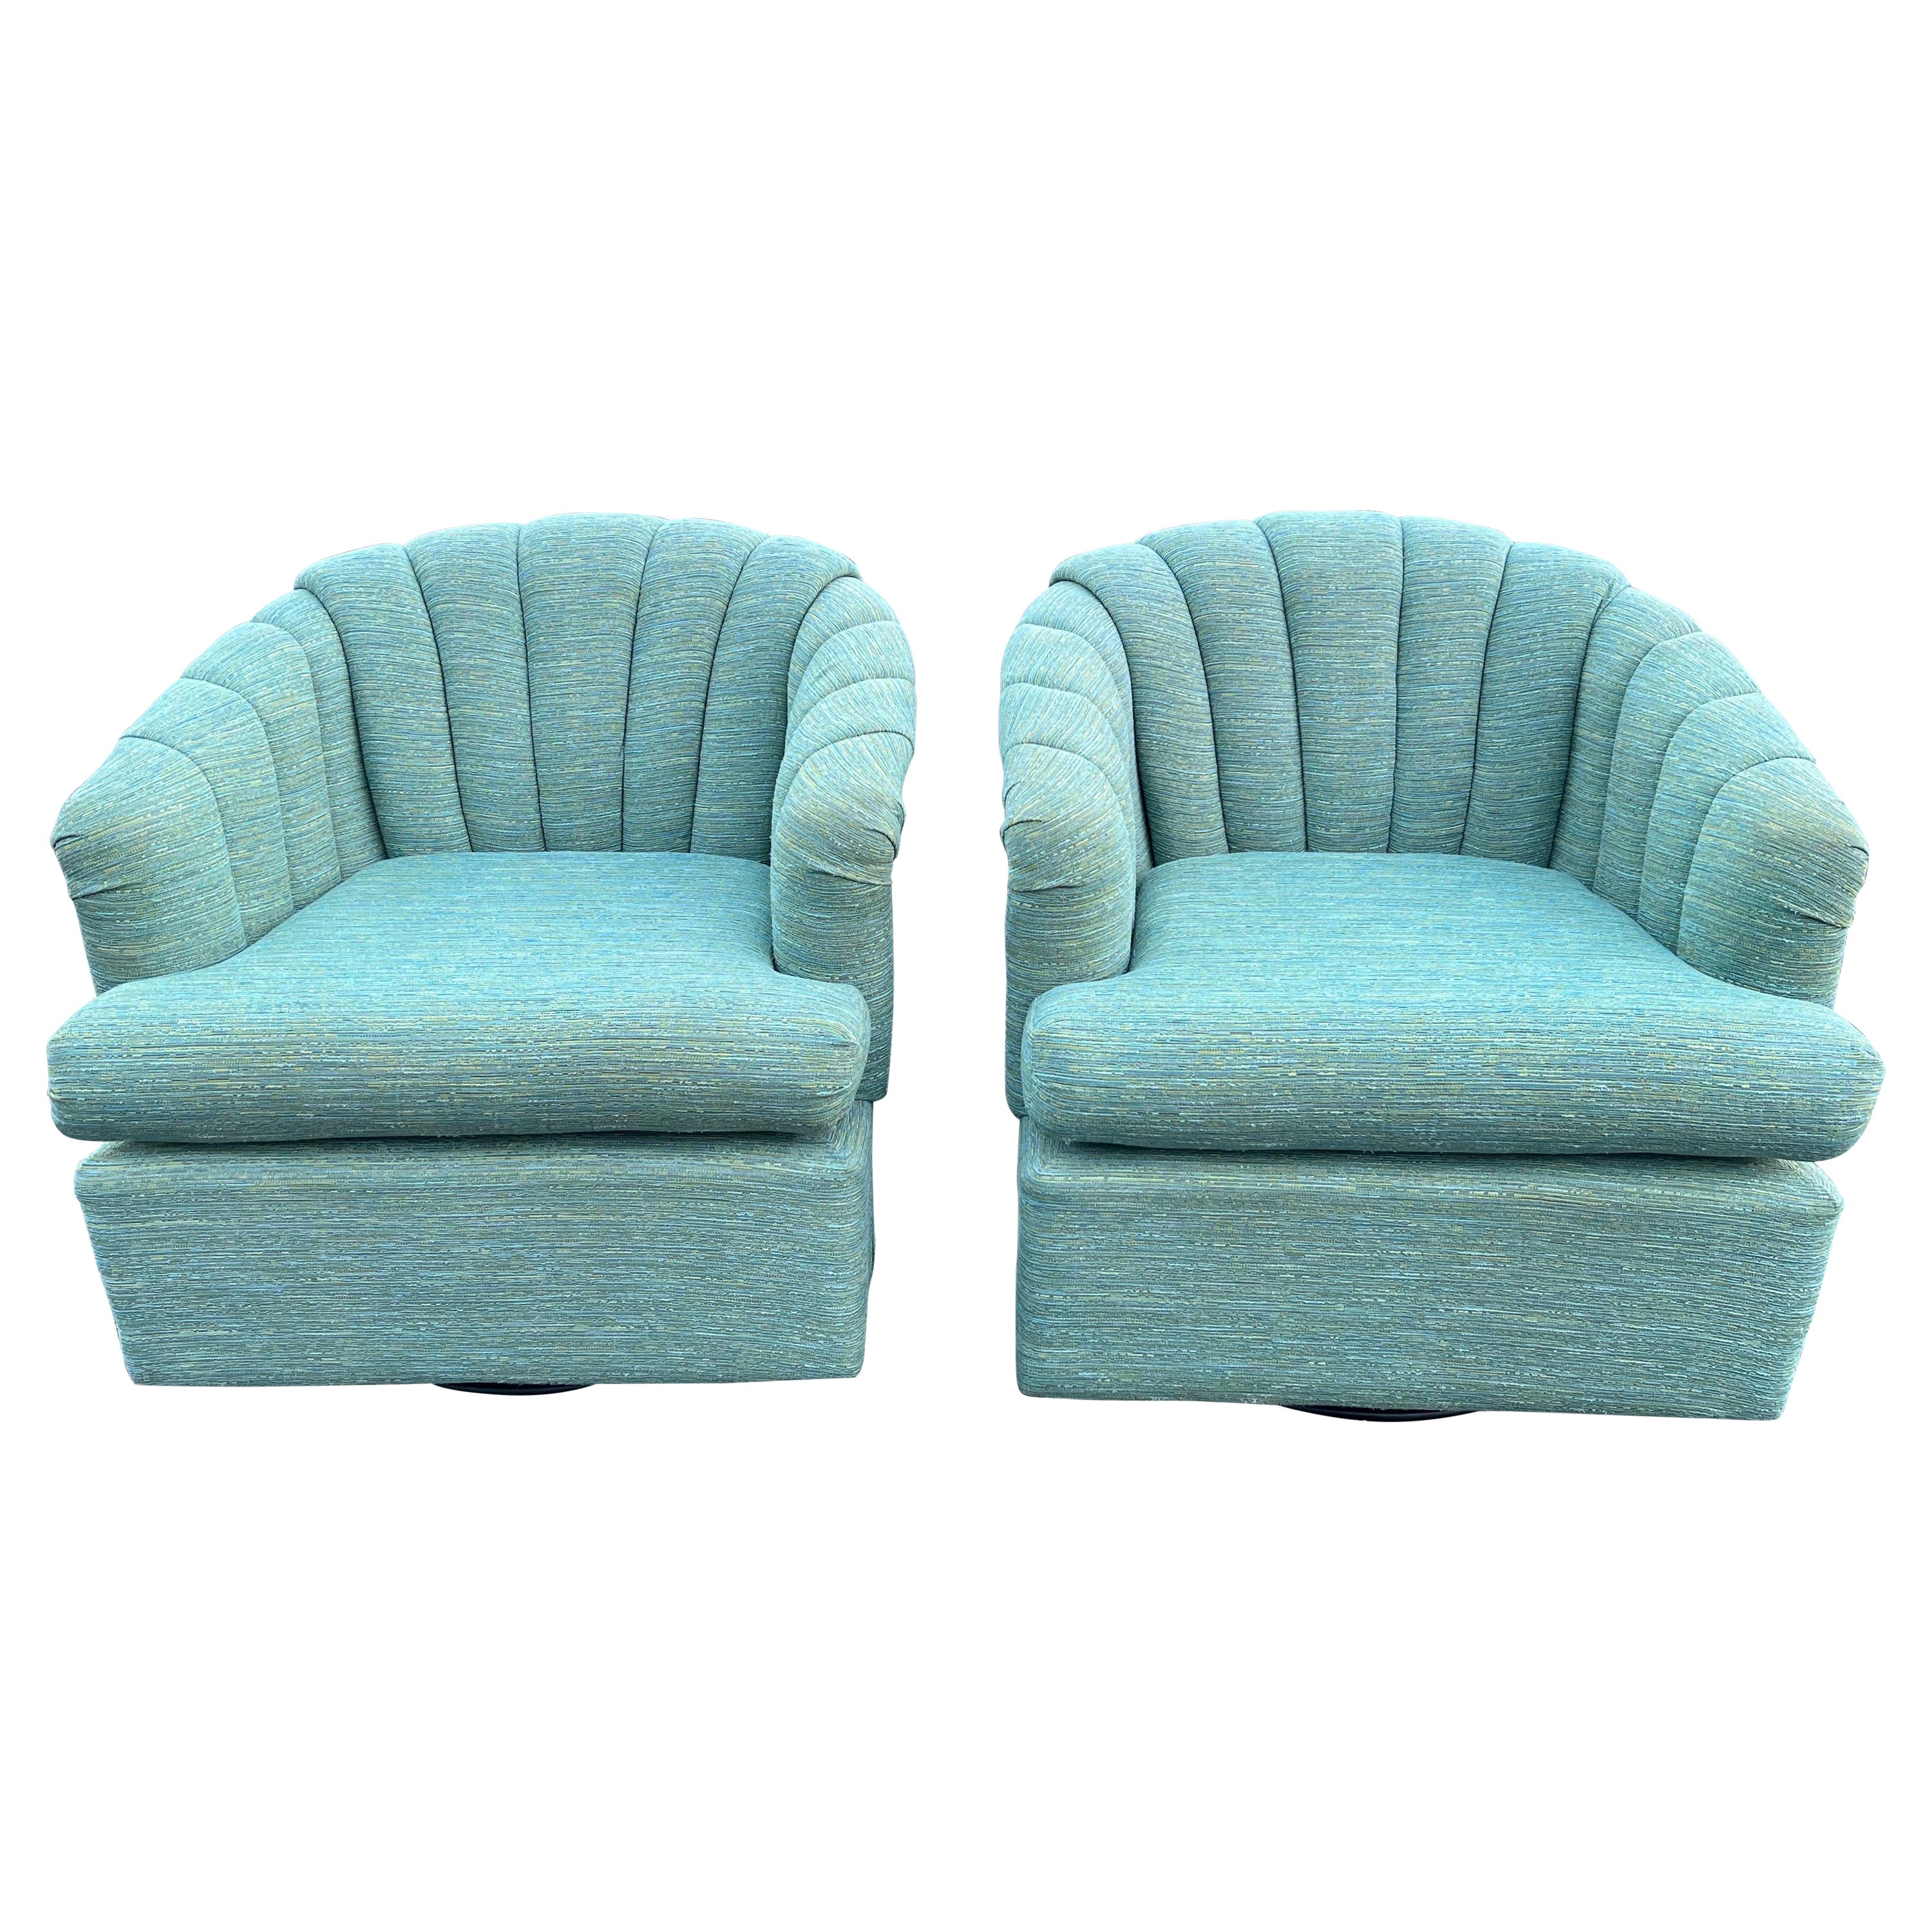 Pair of Turquoise Channel Back Swivel Chairs  For Sale